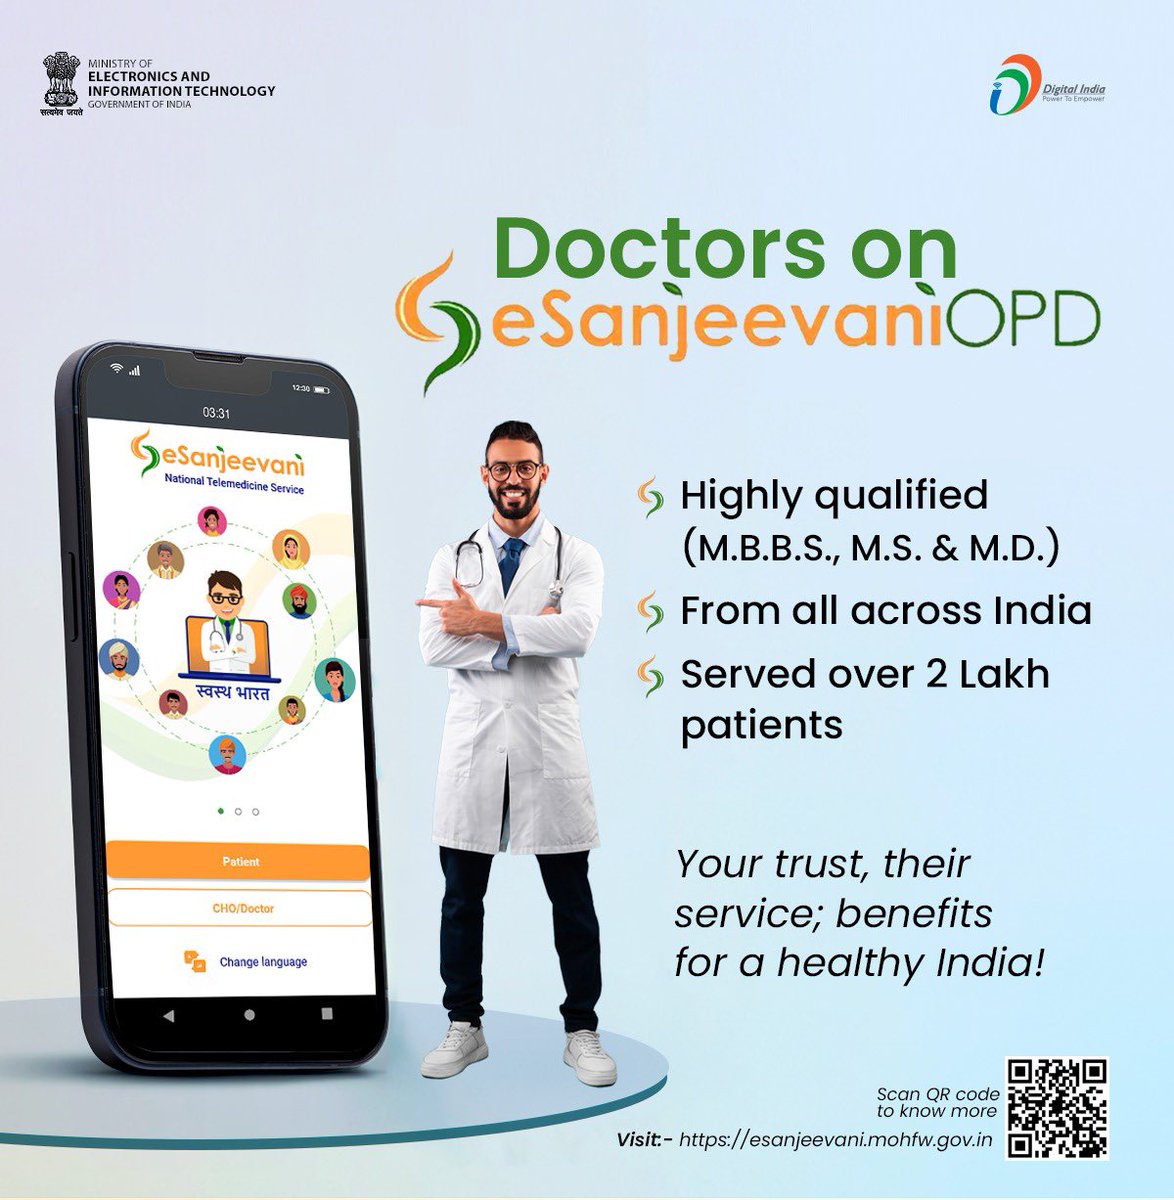 Worried about getting quality healthcare advice online? Get the best of experienced doctors to consult with on #eSanjeevani OPD - esanjeevani.mohfw.gov.in #DigitalIndia #telemedicine @MoHFW_INDIA @CSCegov_